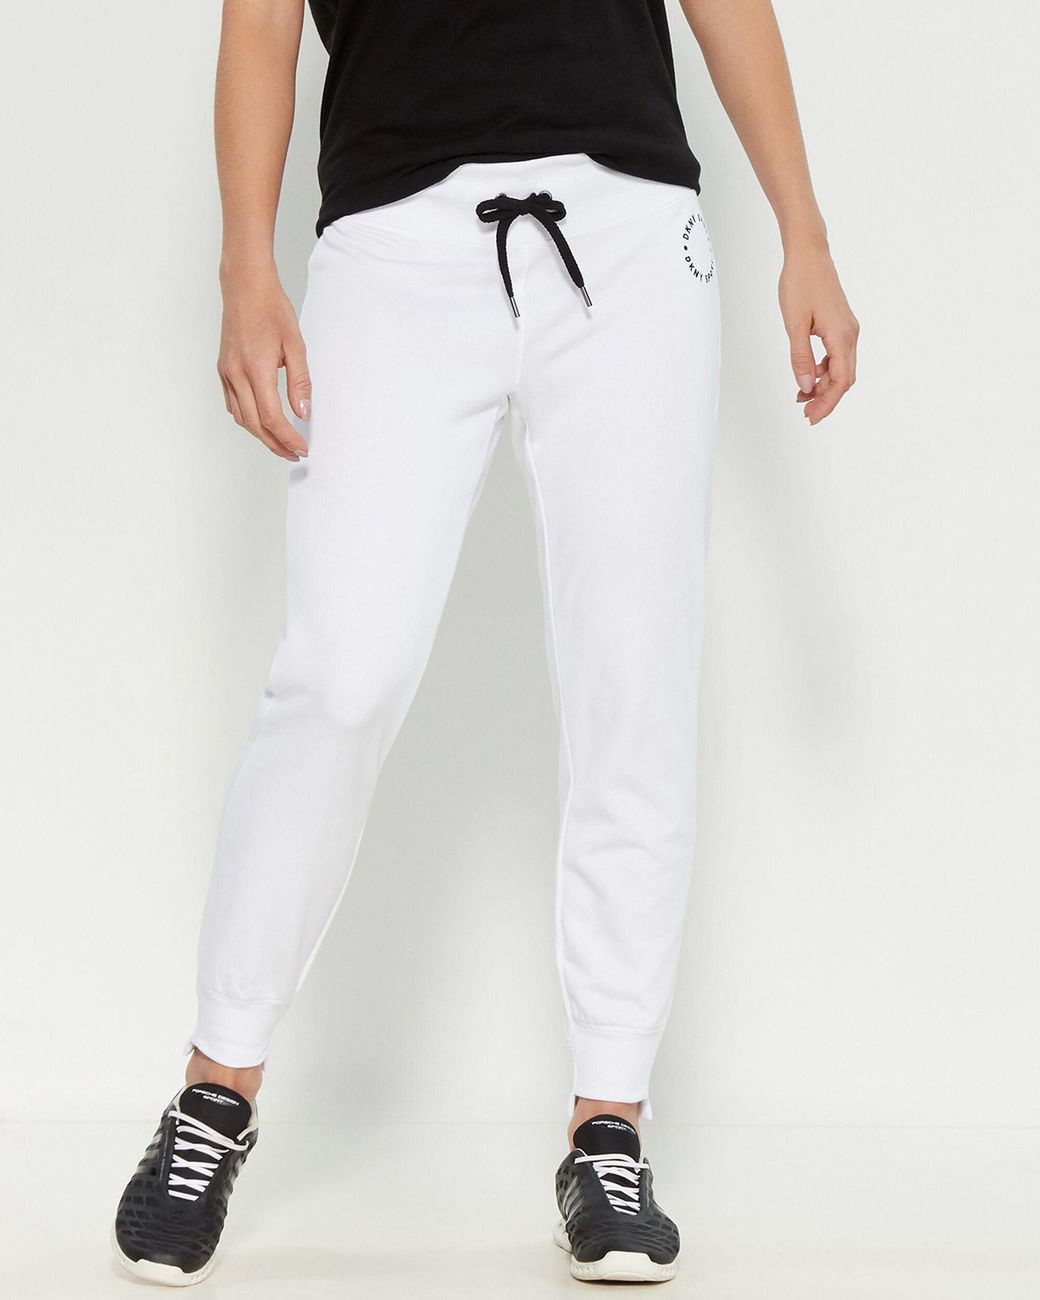 DKNY Cotton Sport Logo Joggers in White - Lyst